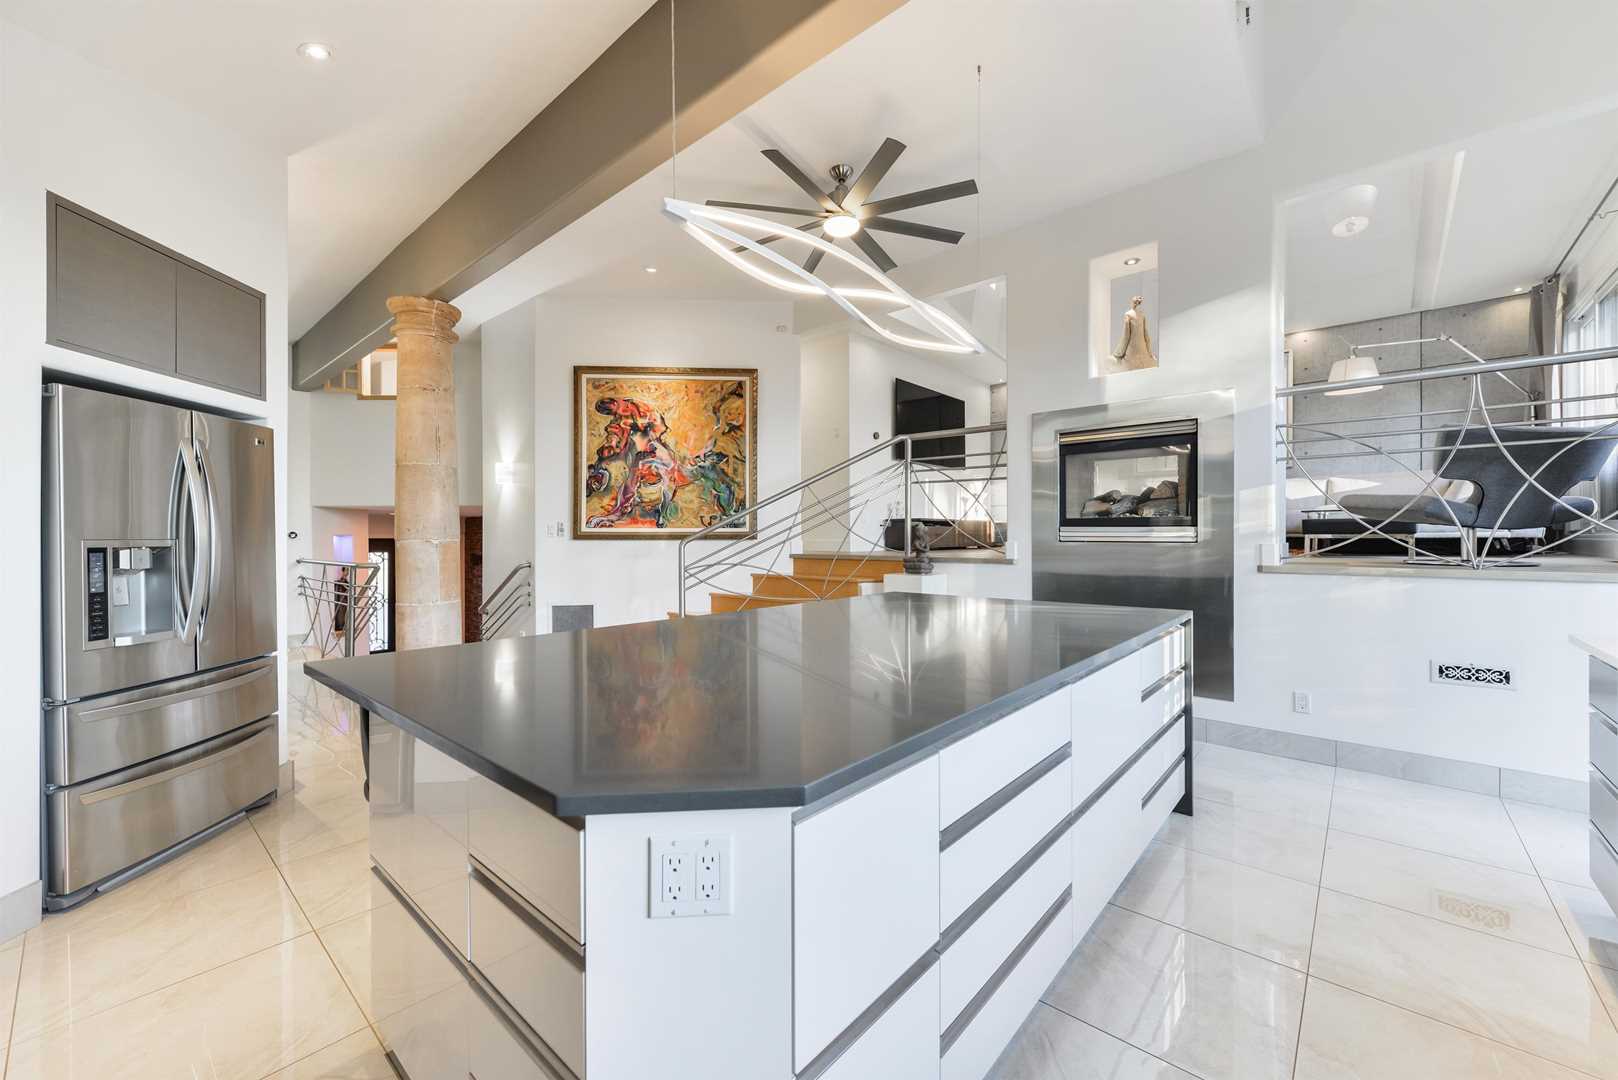 Kitchen with white tile floor, white ceiling and walls; white rectangular island with grey counter underneath tube lighting and silver ceiling fan; two-way fireplace separates kitchen from risen living room